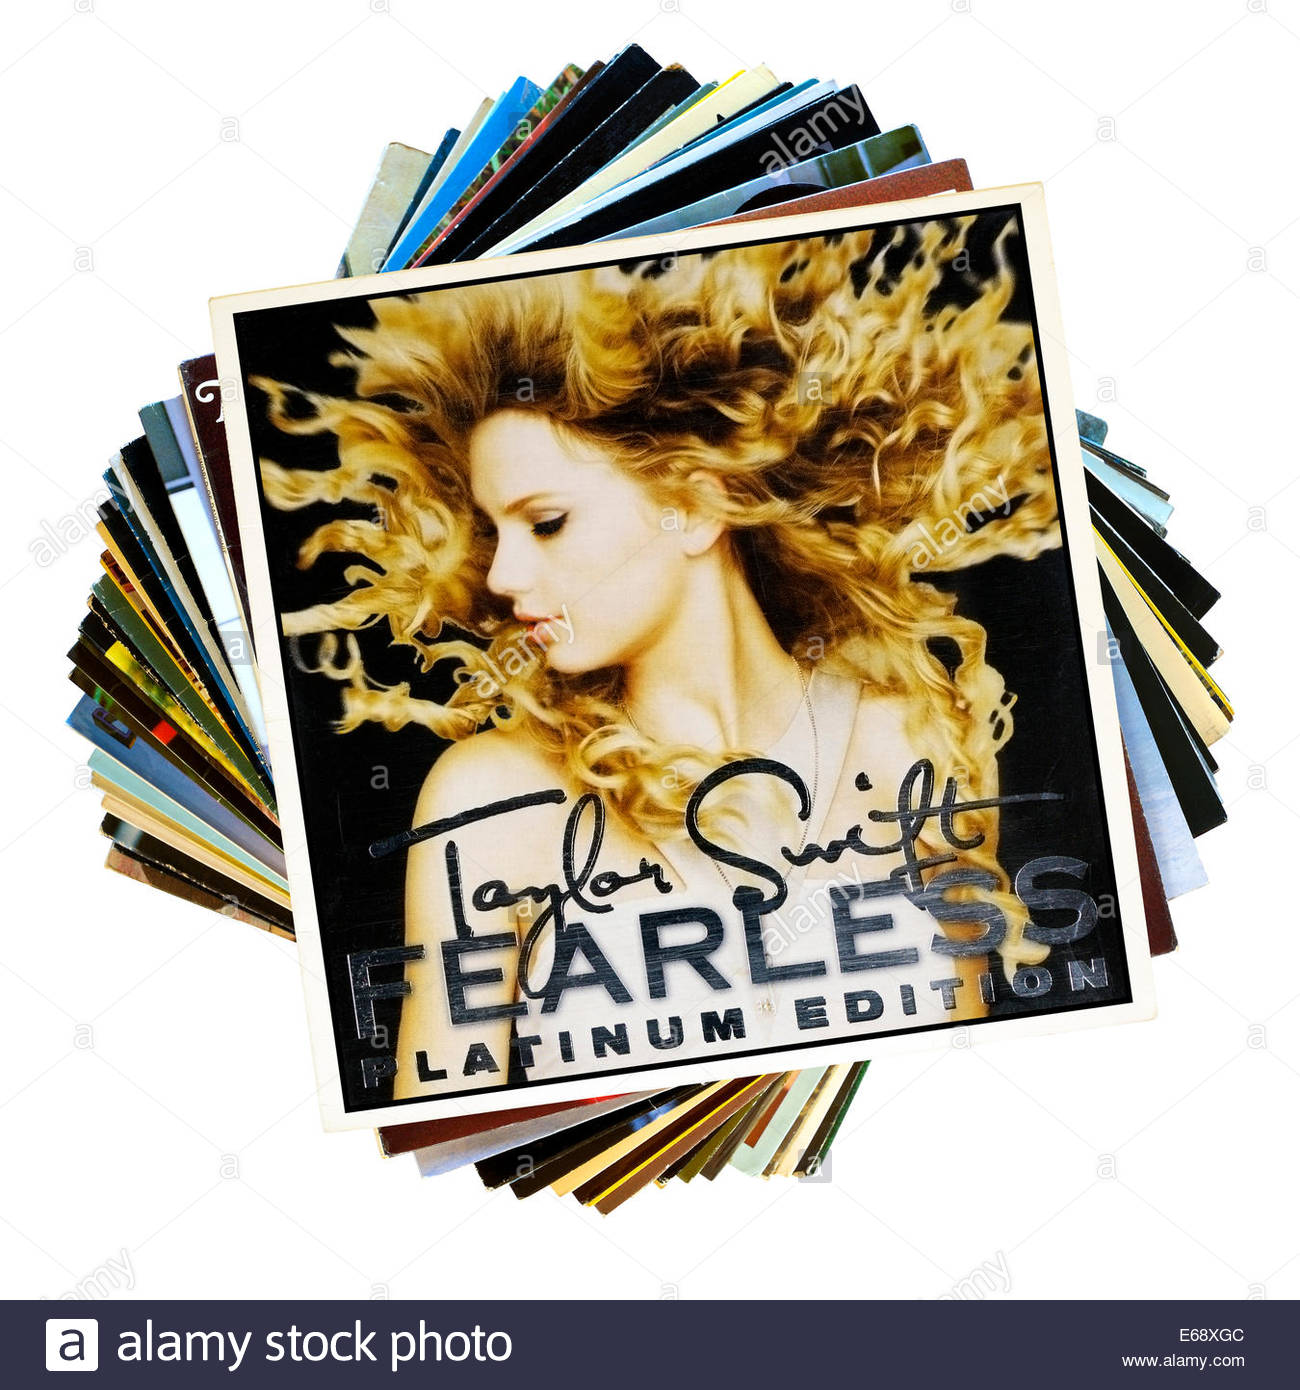 Taylor Swift Album Fearless Stack Of Lp Records England